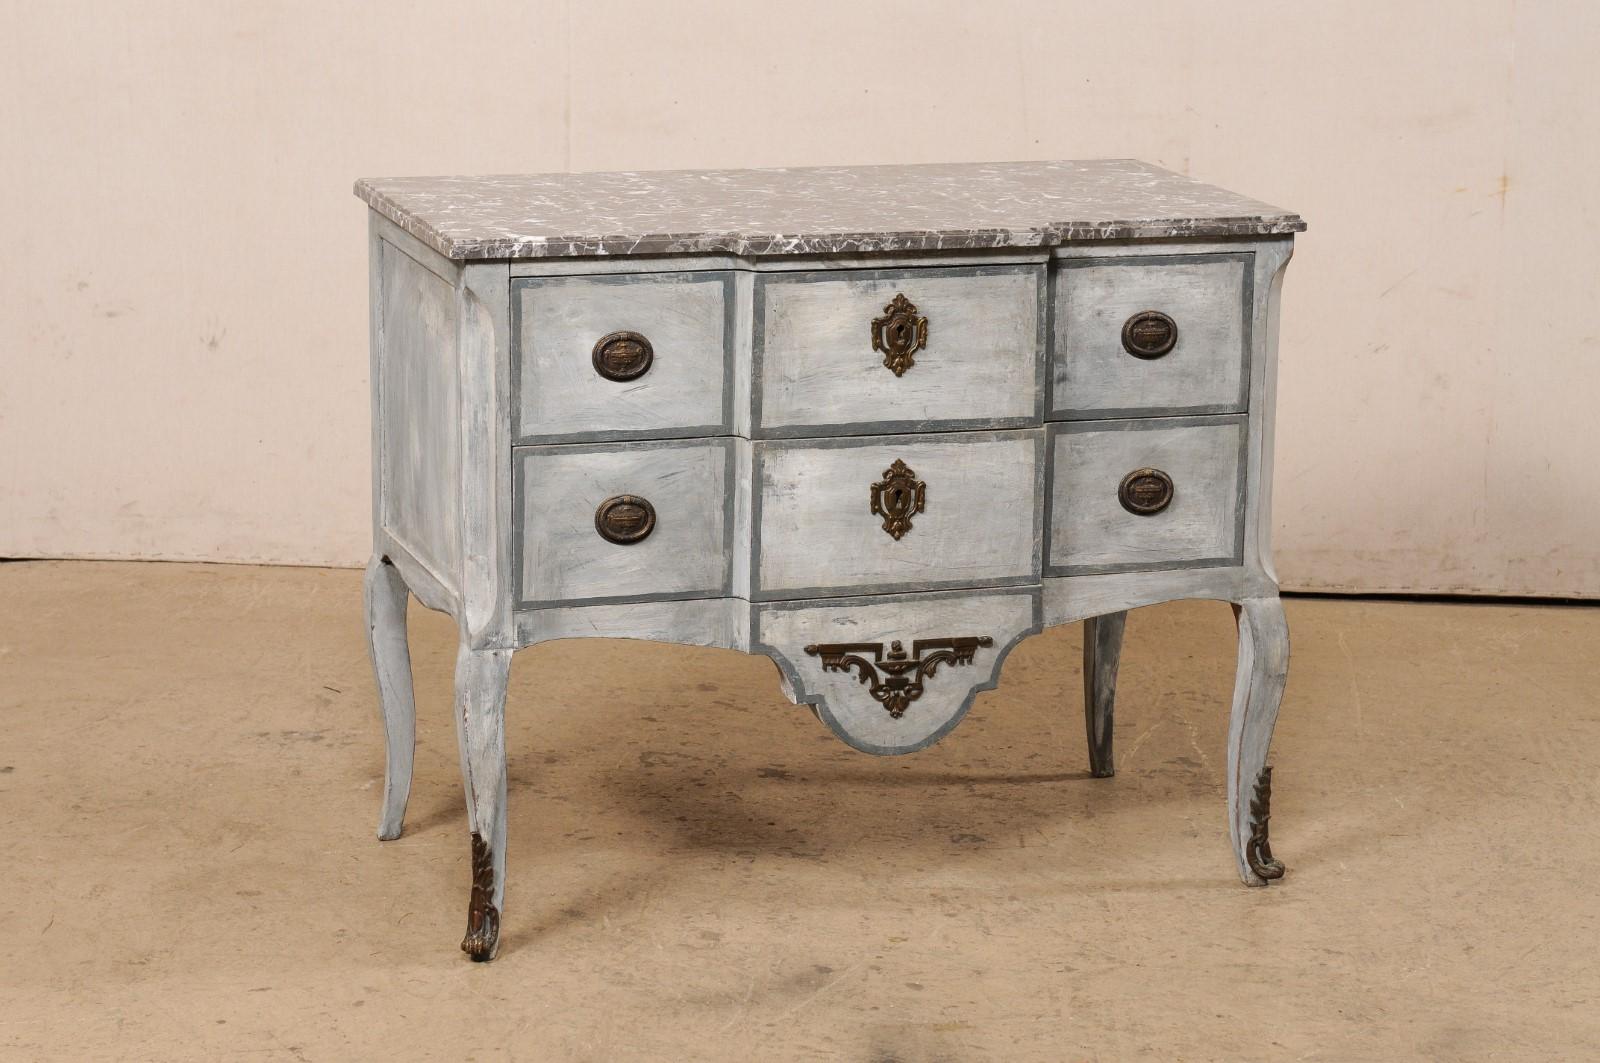 A French Neoclassical carved and painted wood commode with marble top from the 19th century. This antique chest from France features a subtle break-front design that carries through from the marble top to the wood cabinet below. The charcoal top